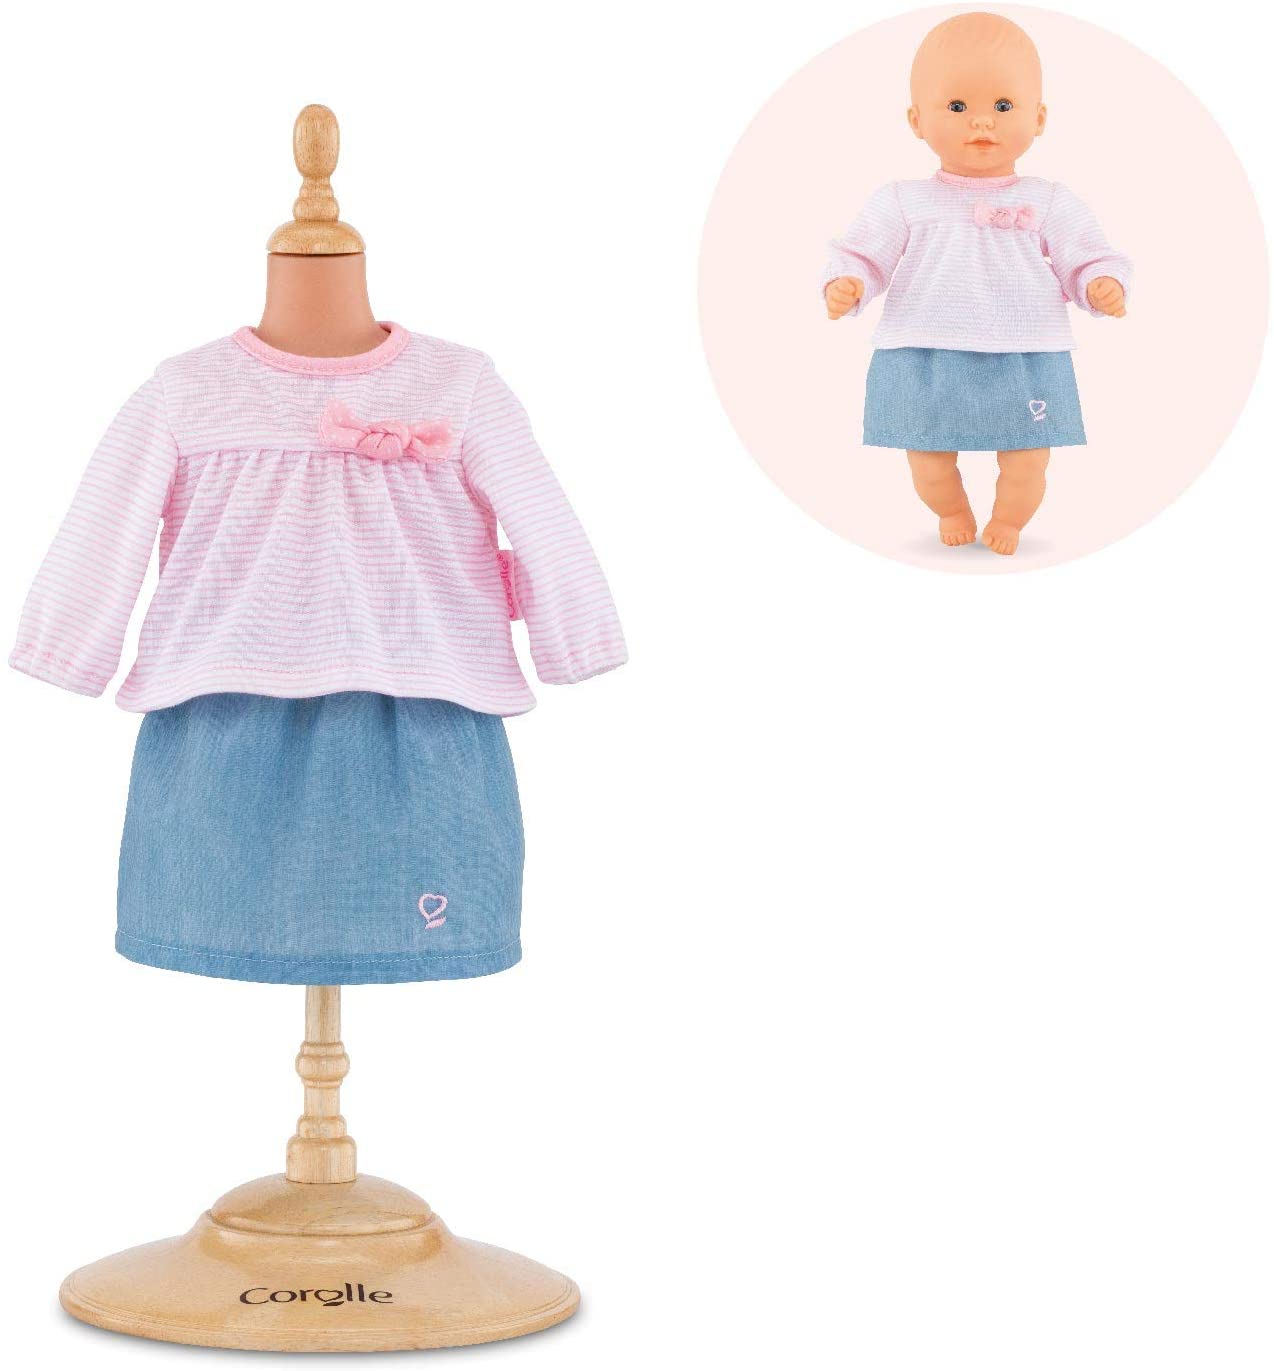 Corolle - Top & Skirt - Baby Doll Outfit - Clothing Accessory for 12" Dolls Pink/Blue…